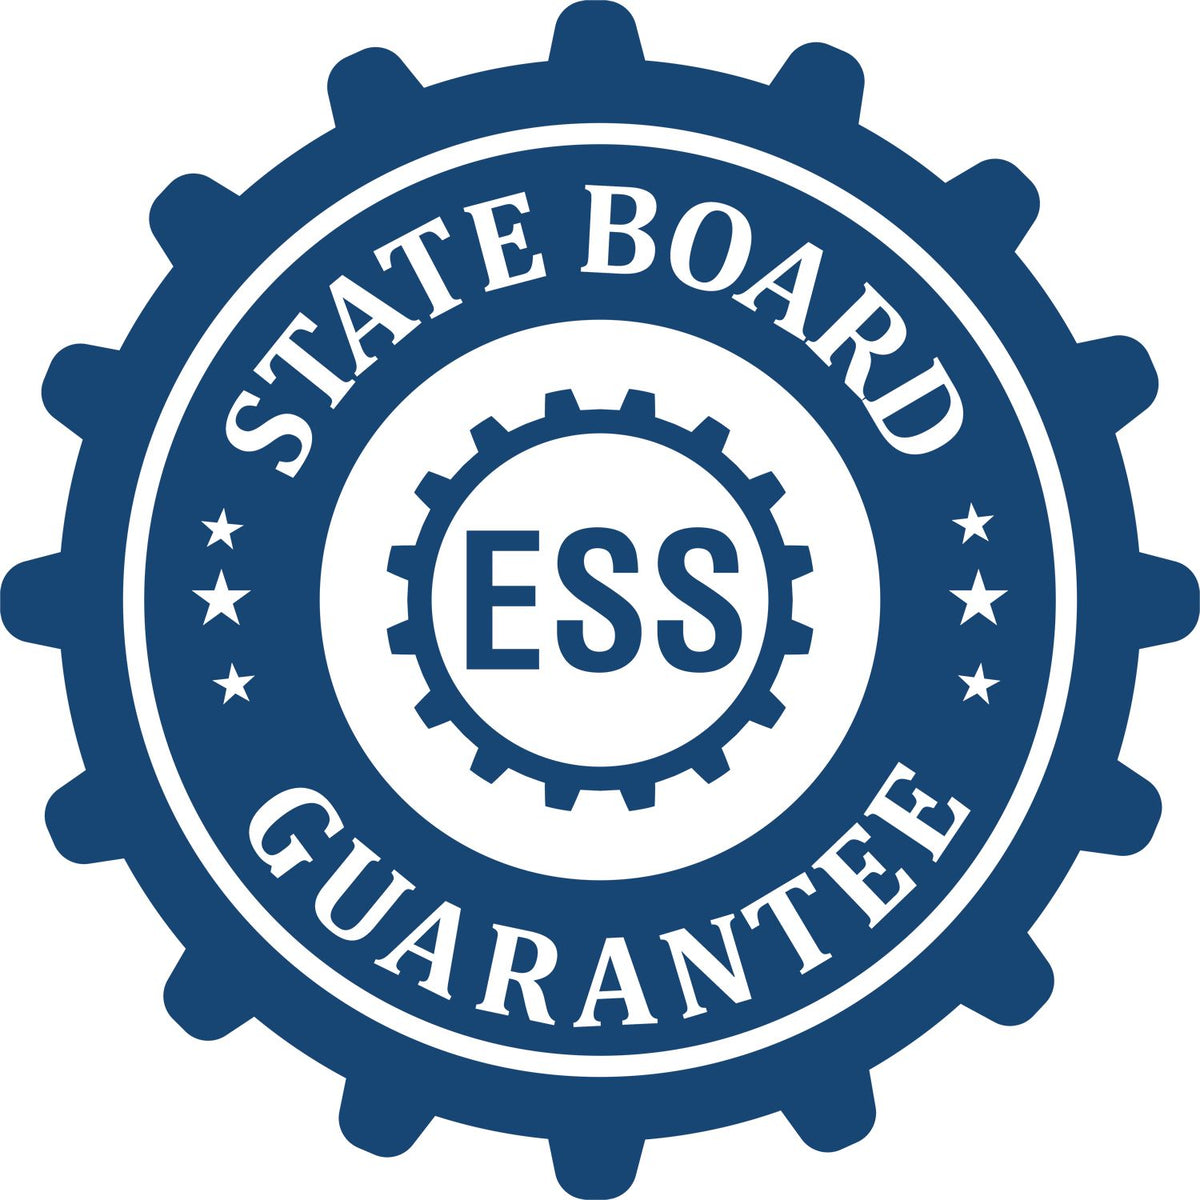 An emblem in a gear shape illustrating a state board guarantee for the Gift Florida Architect Seal